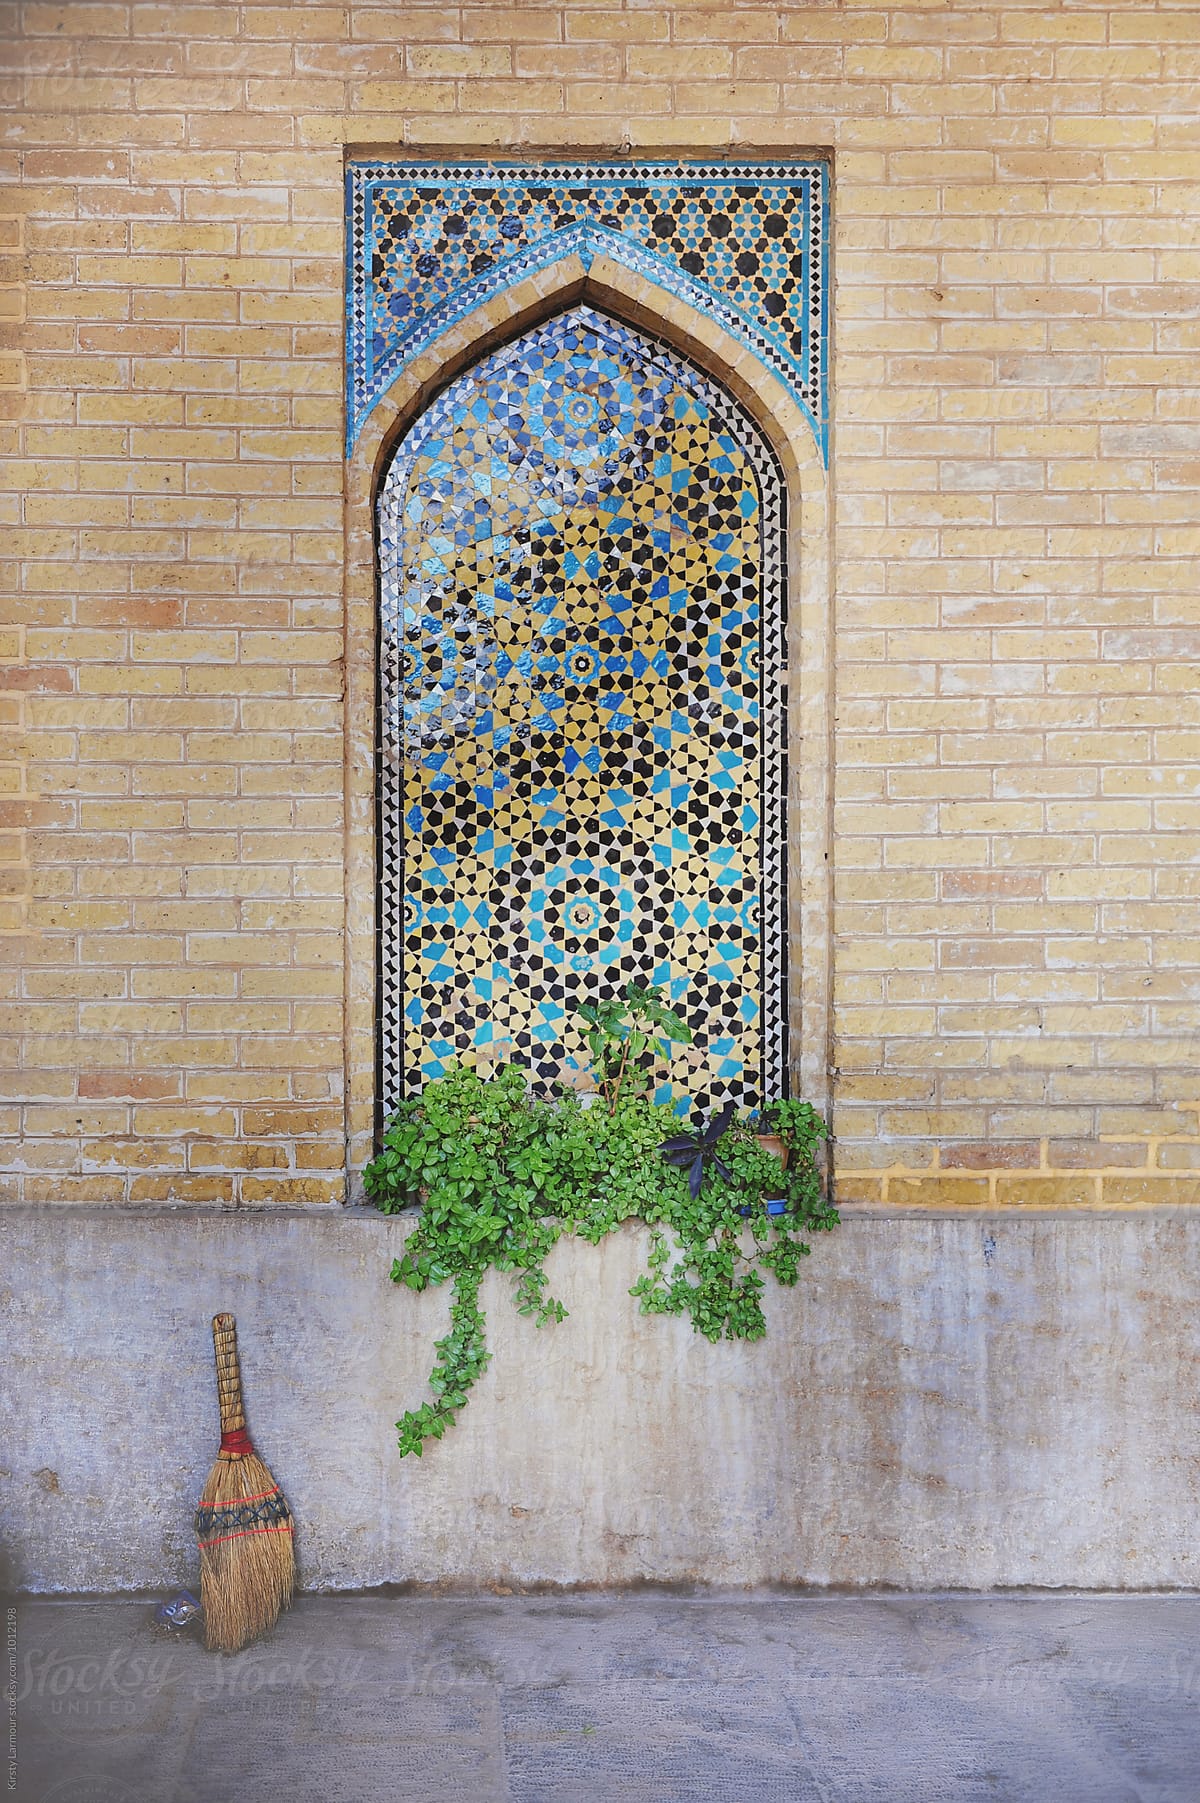 Decorative tiles and a broom inside a Mosque in iran